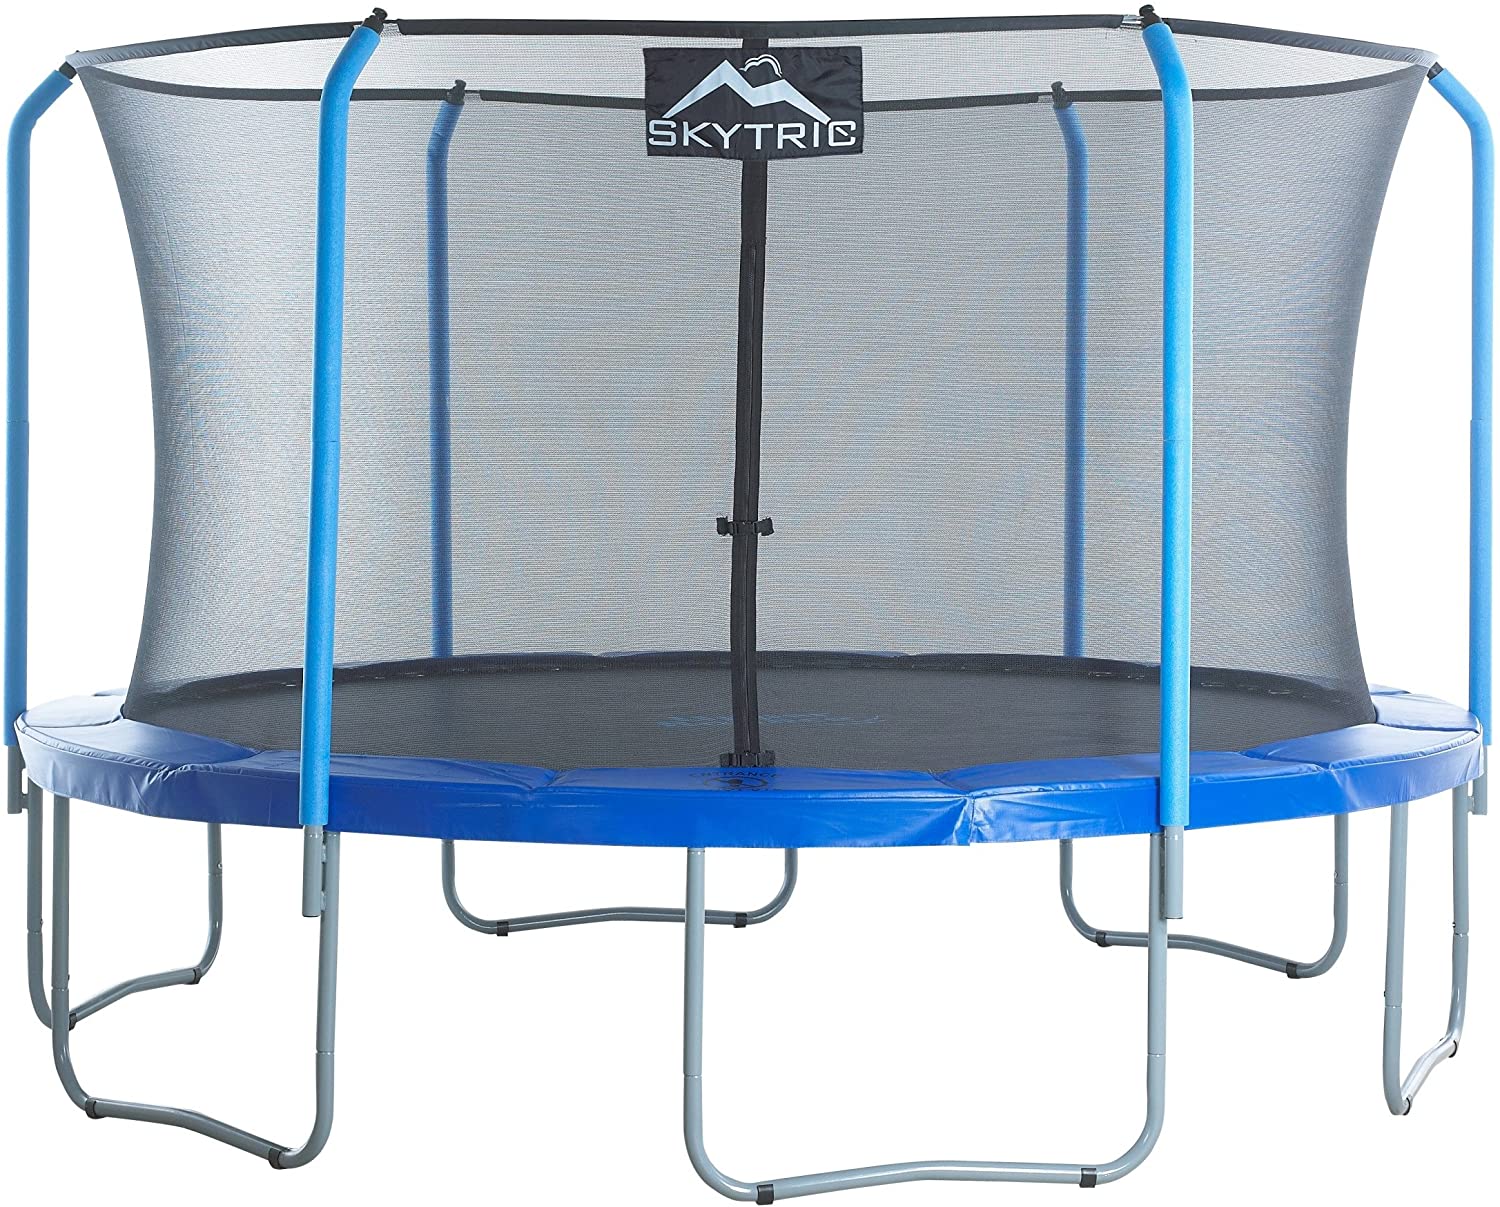 Skytric 13ft Large Trampoline with Top Ring Enclosure System, Safety Net, Jumping Mat